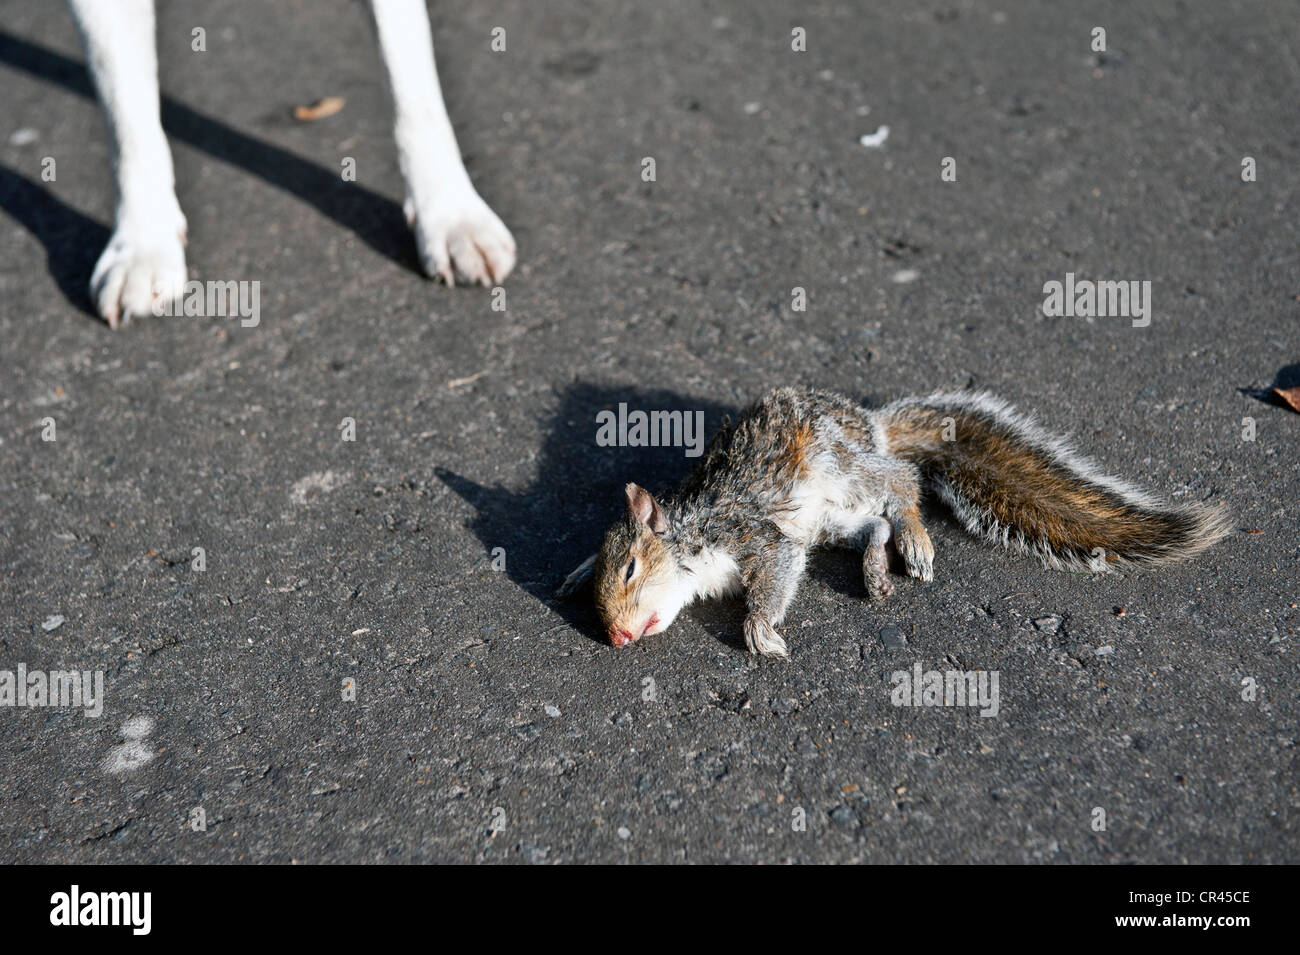 Dead squirrel killed by dog Stock Photo